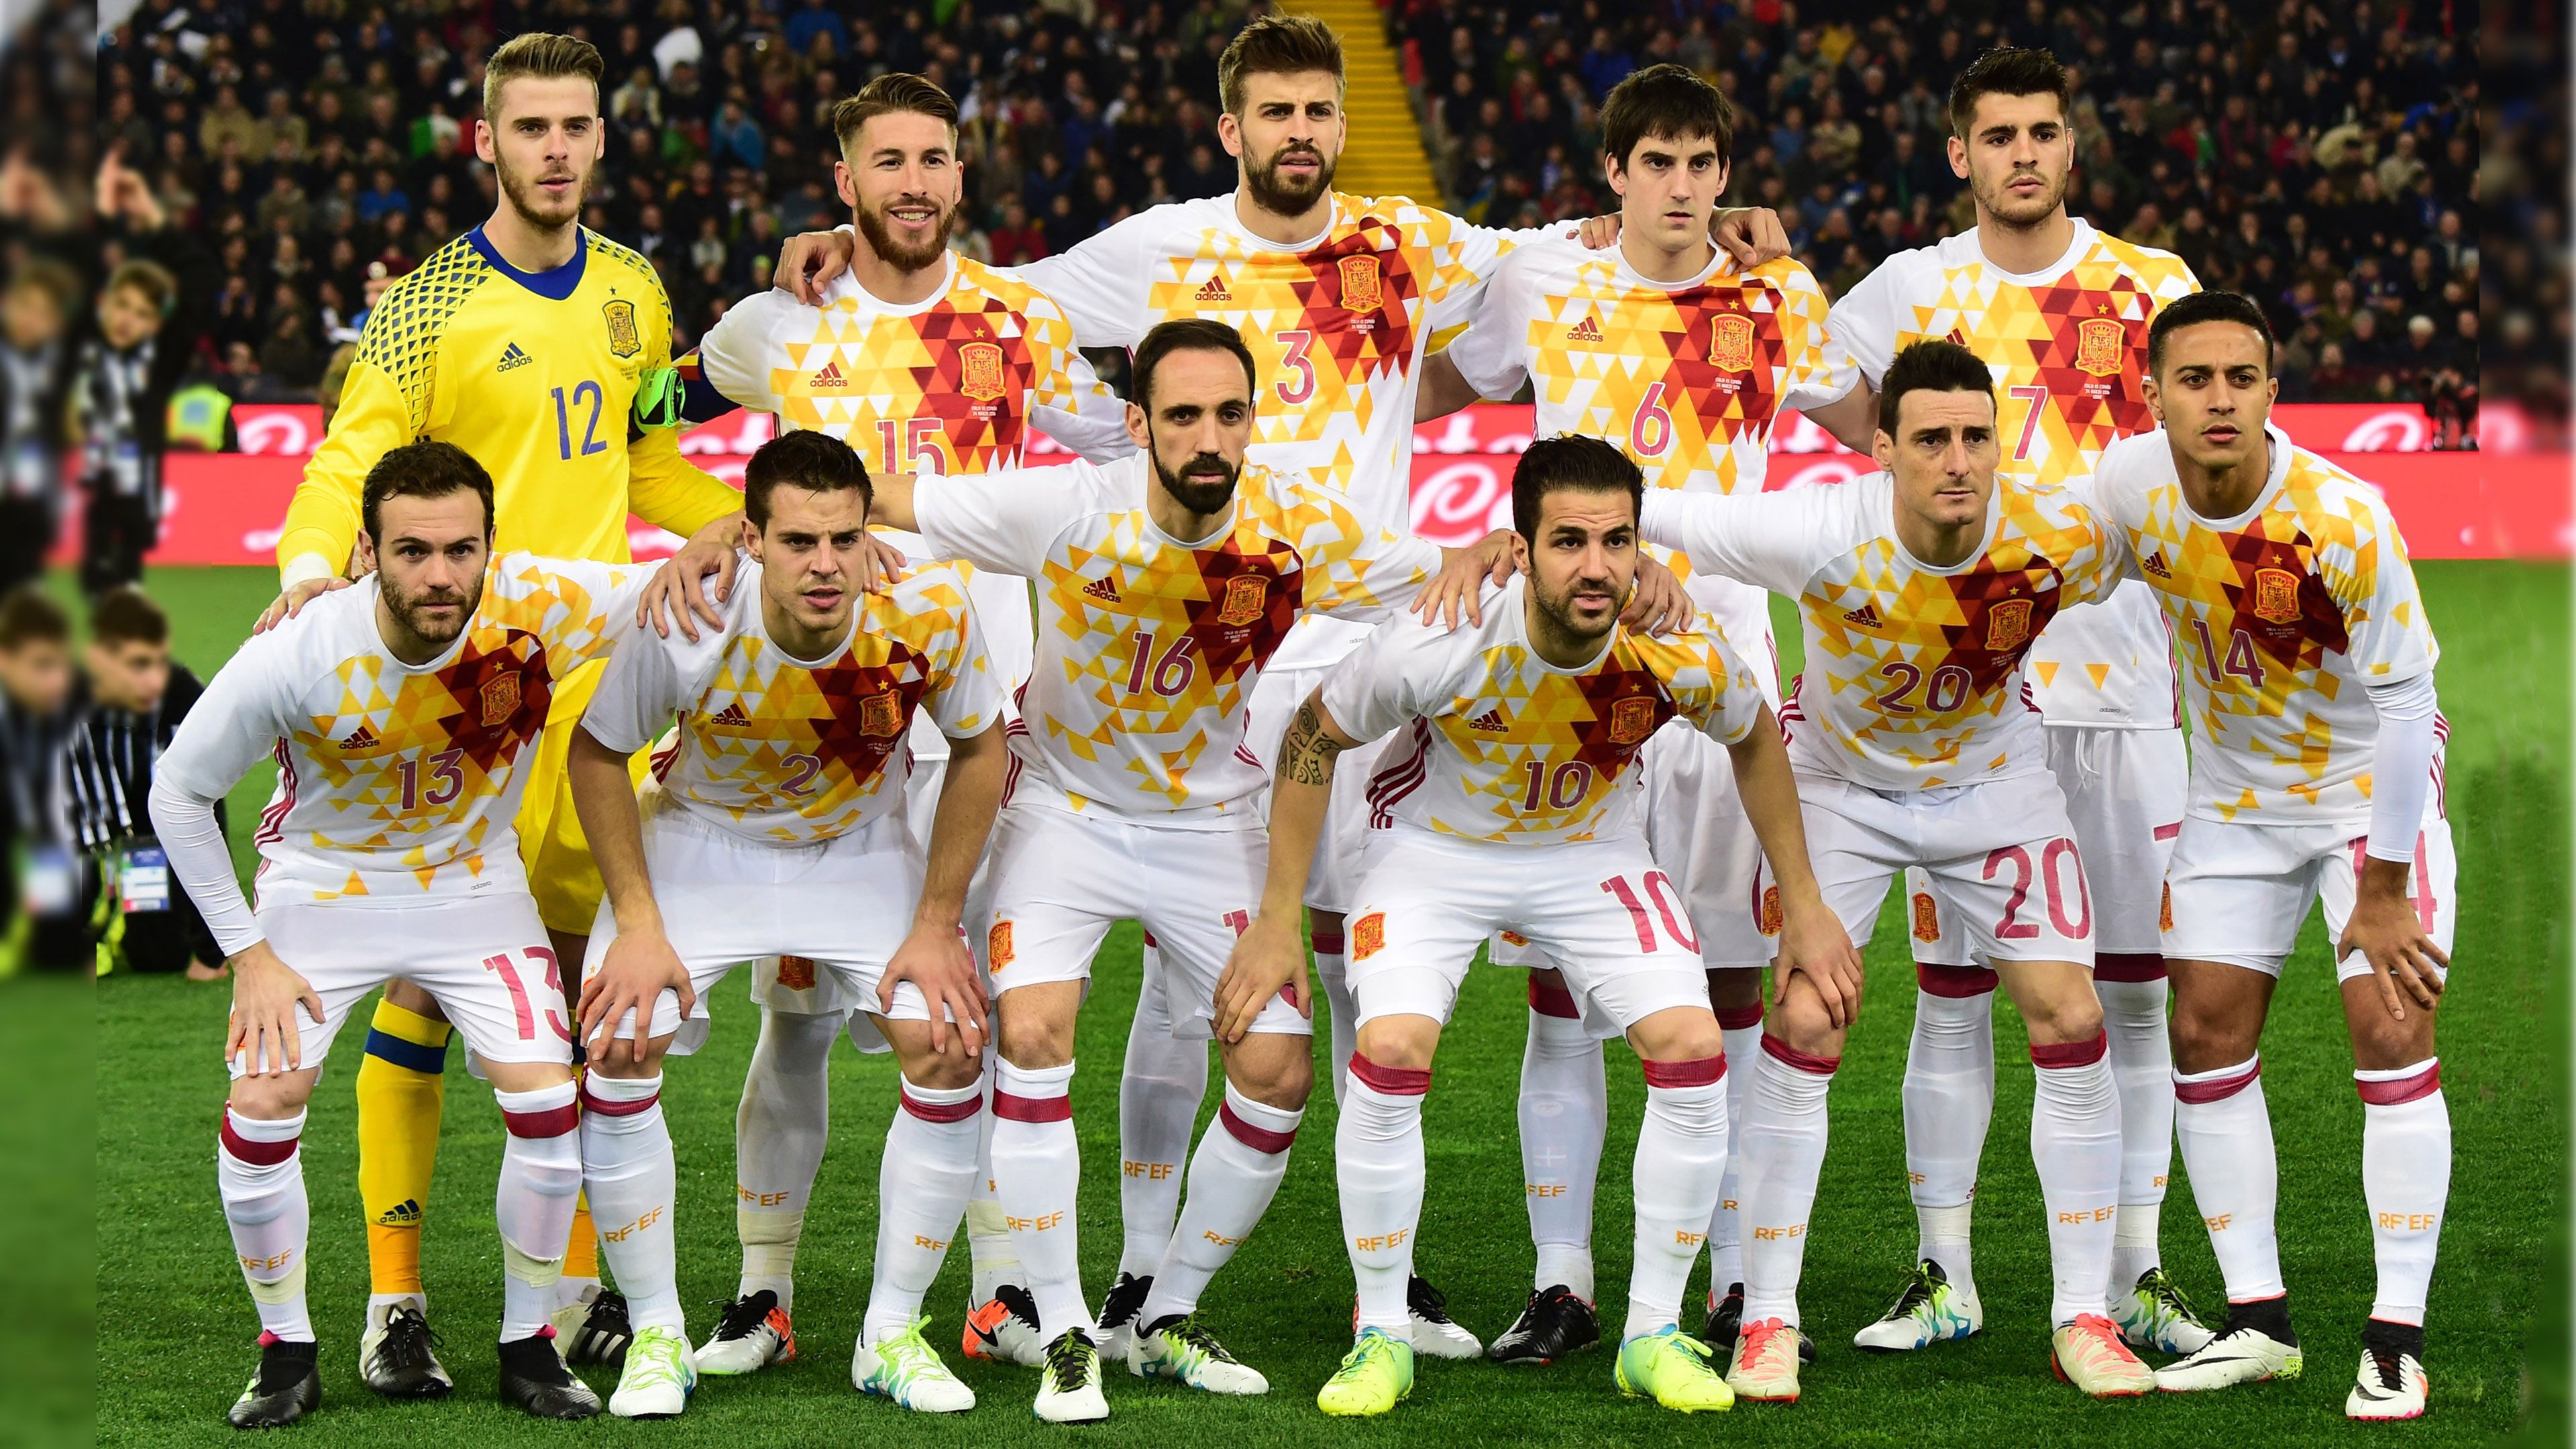 Spain Football Team 2016 with Second Jersey. HD Wallpaper